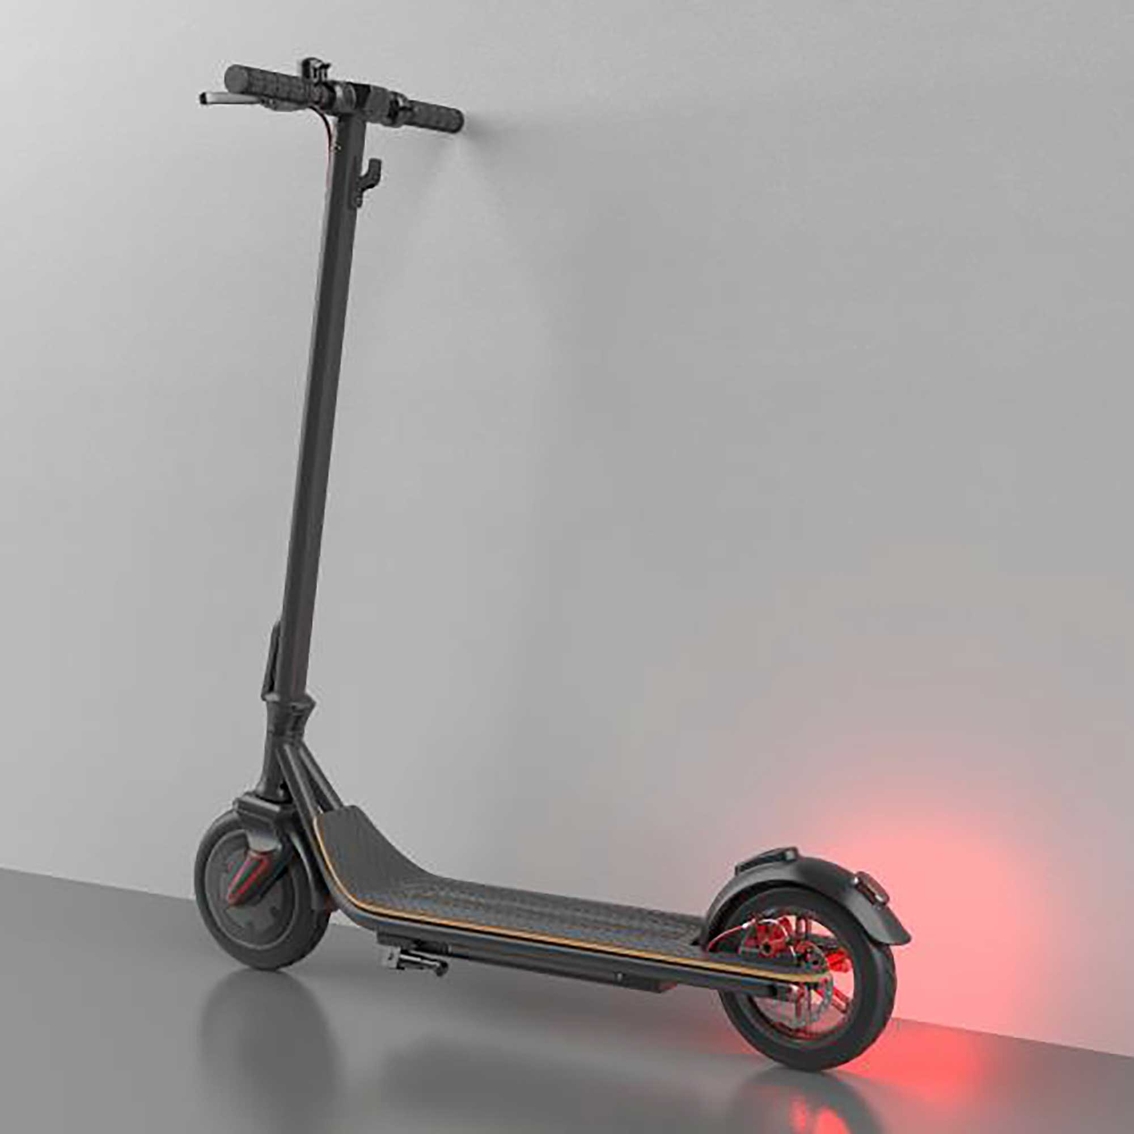 GlareWheel ES-S10X Foldable 350W Electric High Speed City Commuter Scooter - Image 6 of 6